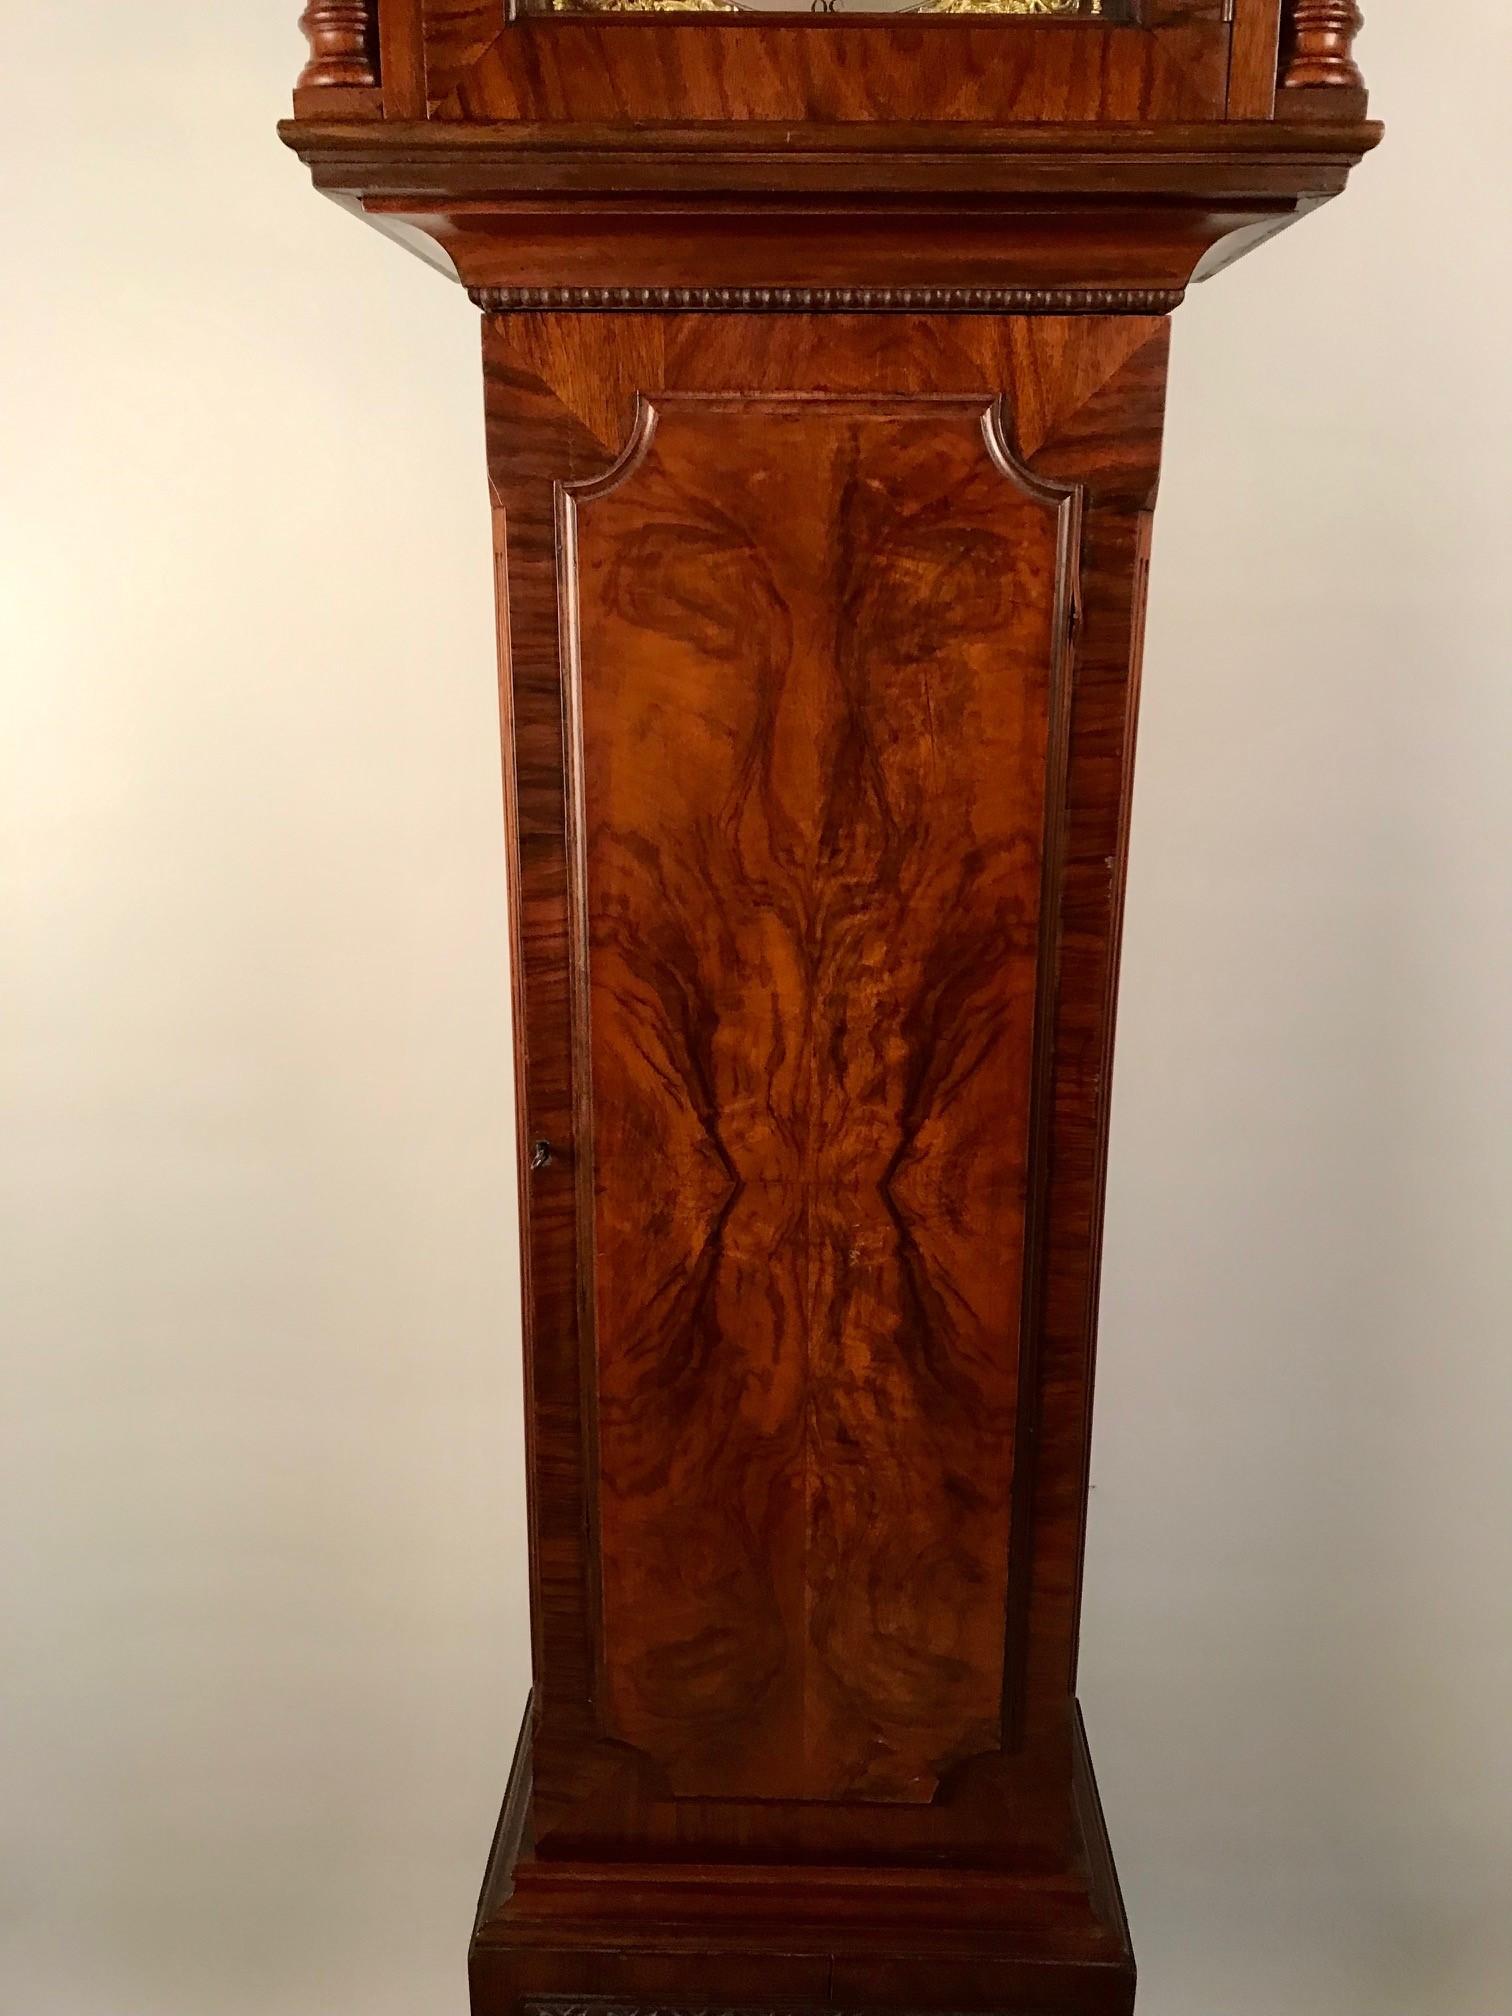 Georgian Westminster Chiming Grandmother Clock in a Mahogany Case For Sale